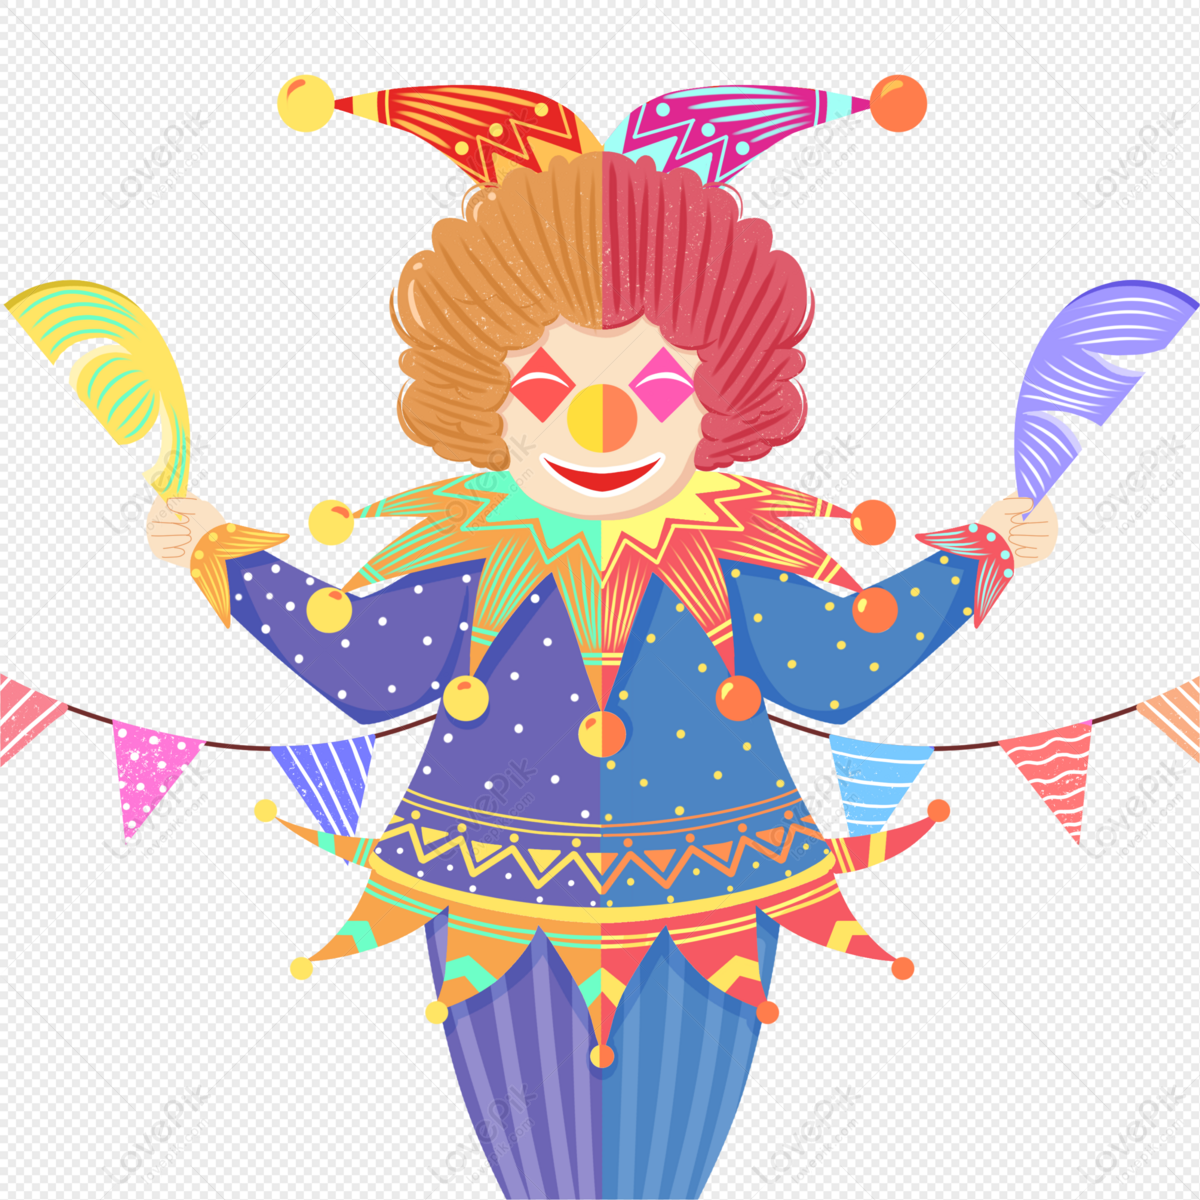 Funny Mask Clown PNG Free Download And Clipart Image For Free Download -  Lovepik | 401696943